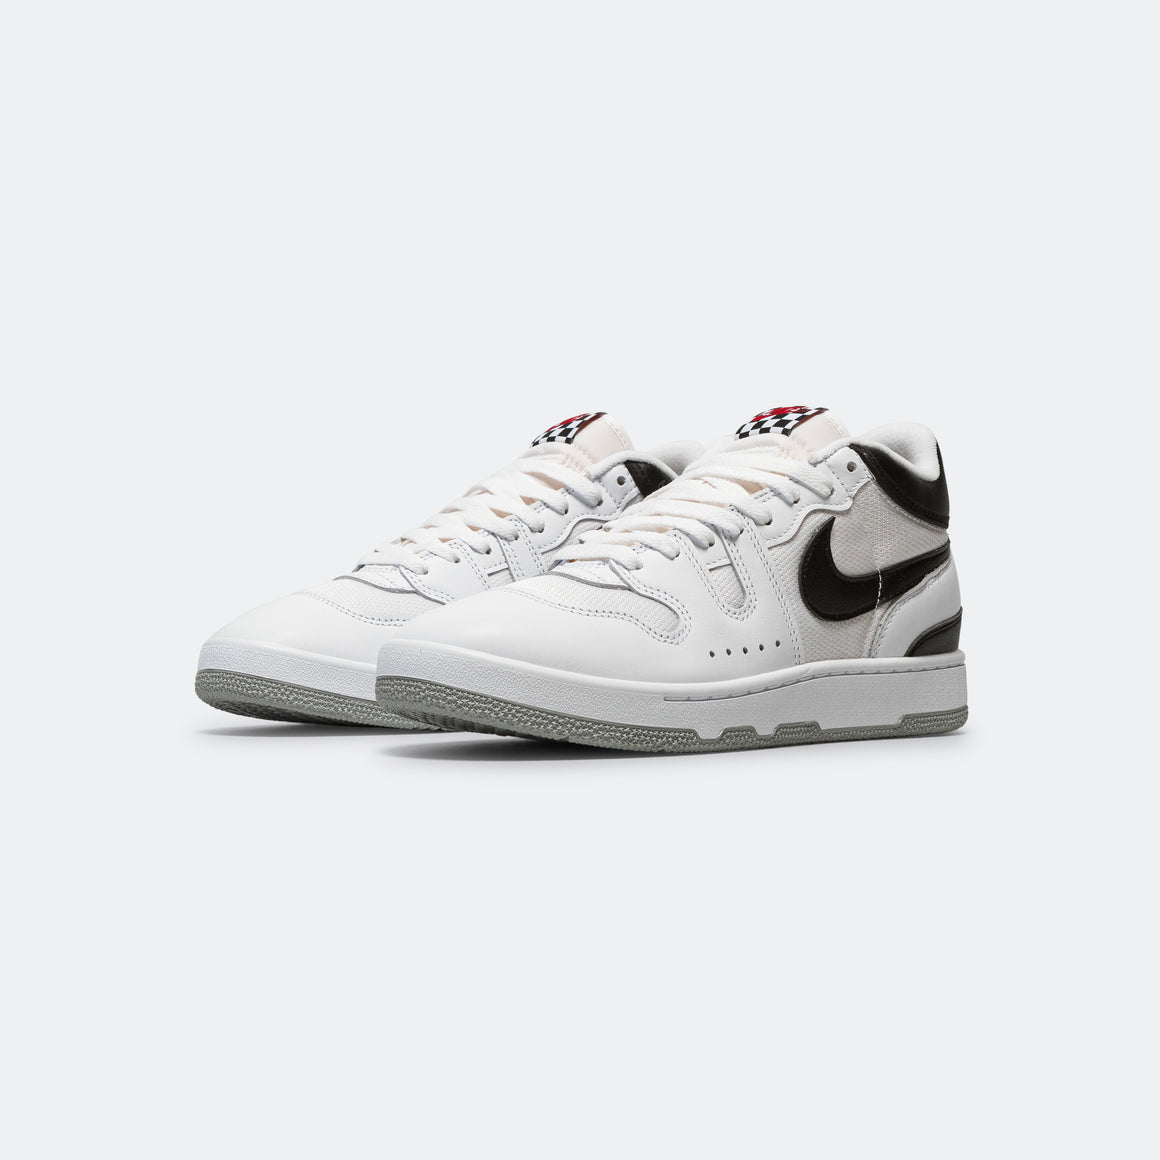 Nike - Attack QS SP - White/Black-White - UP THERE